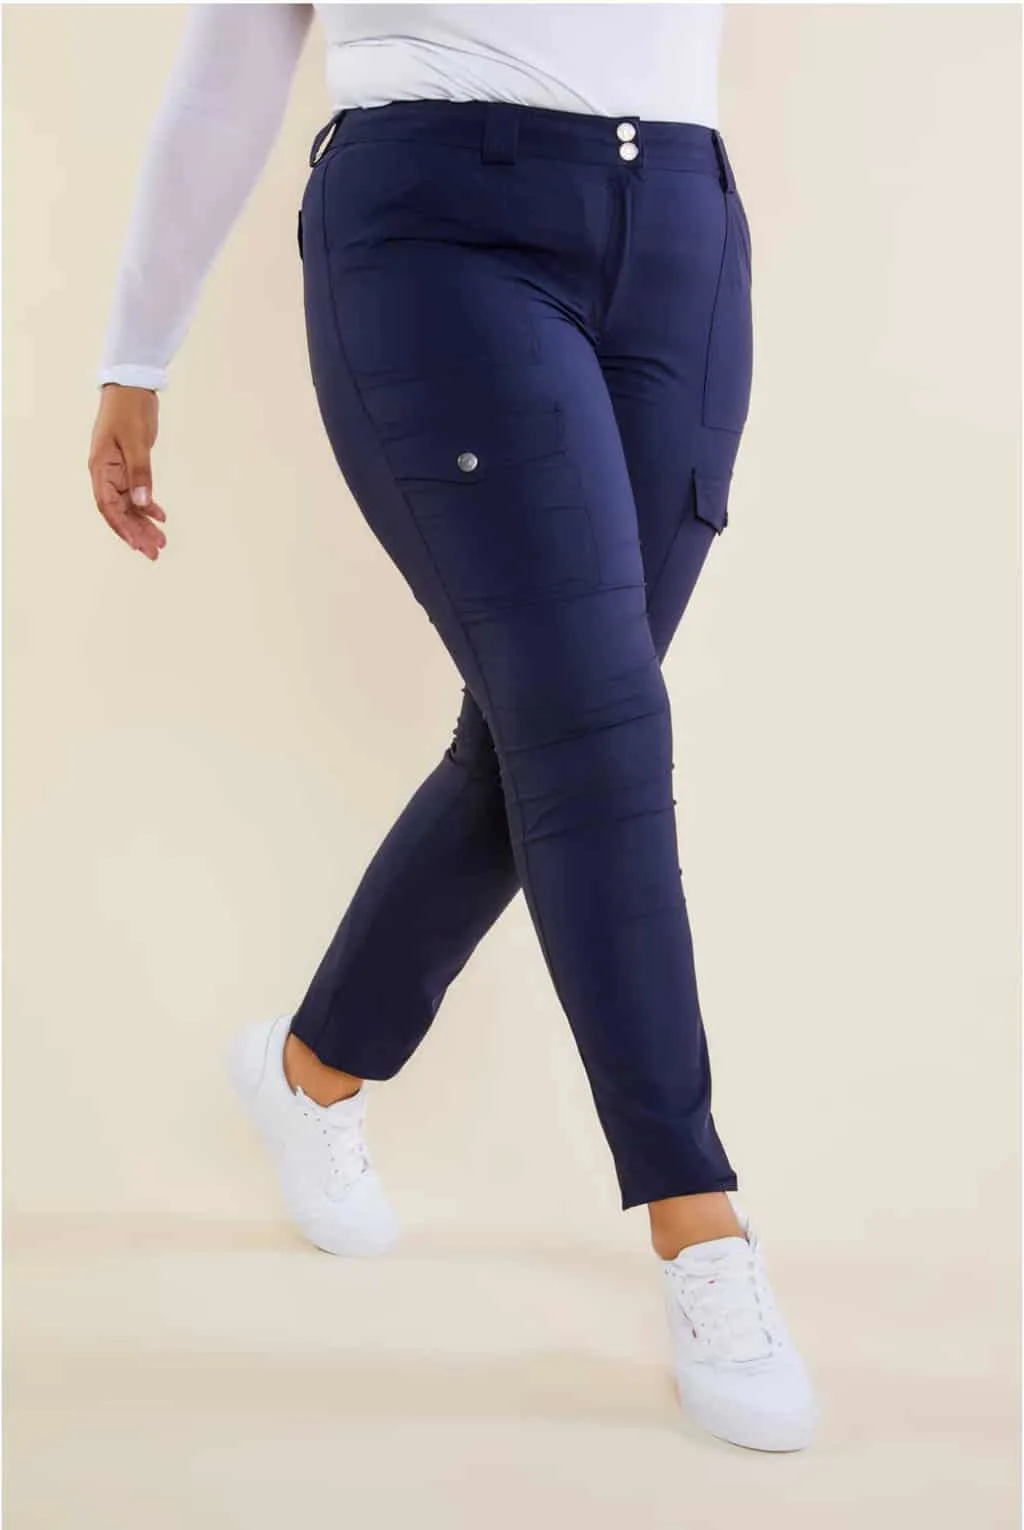 Woman modelling waist down navy travel pants with white top and white sneakers.